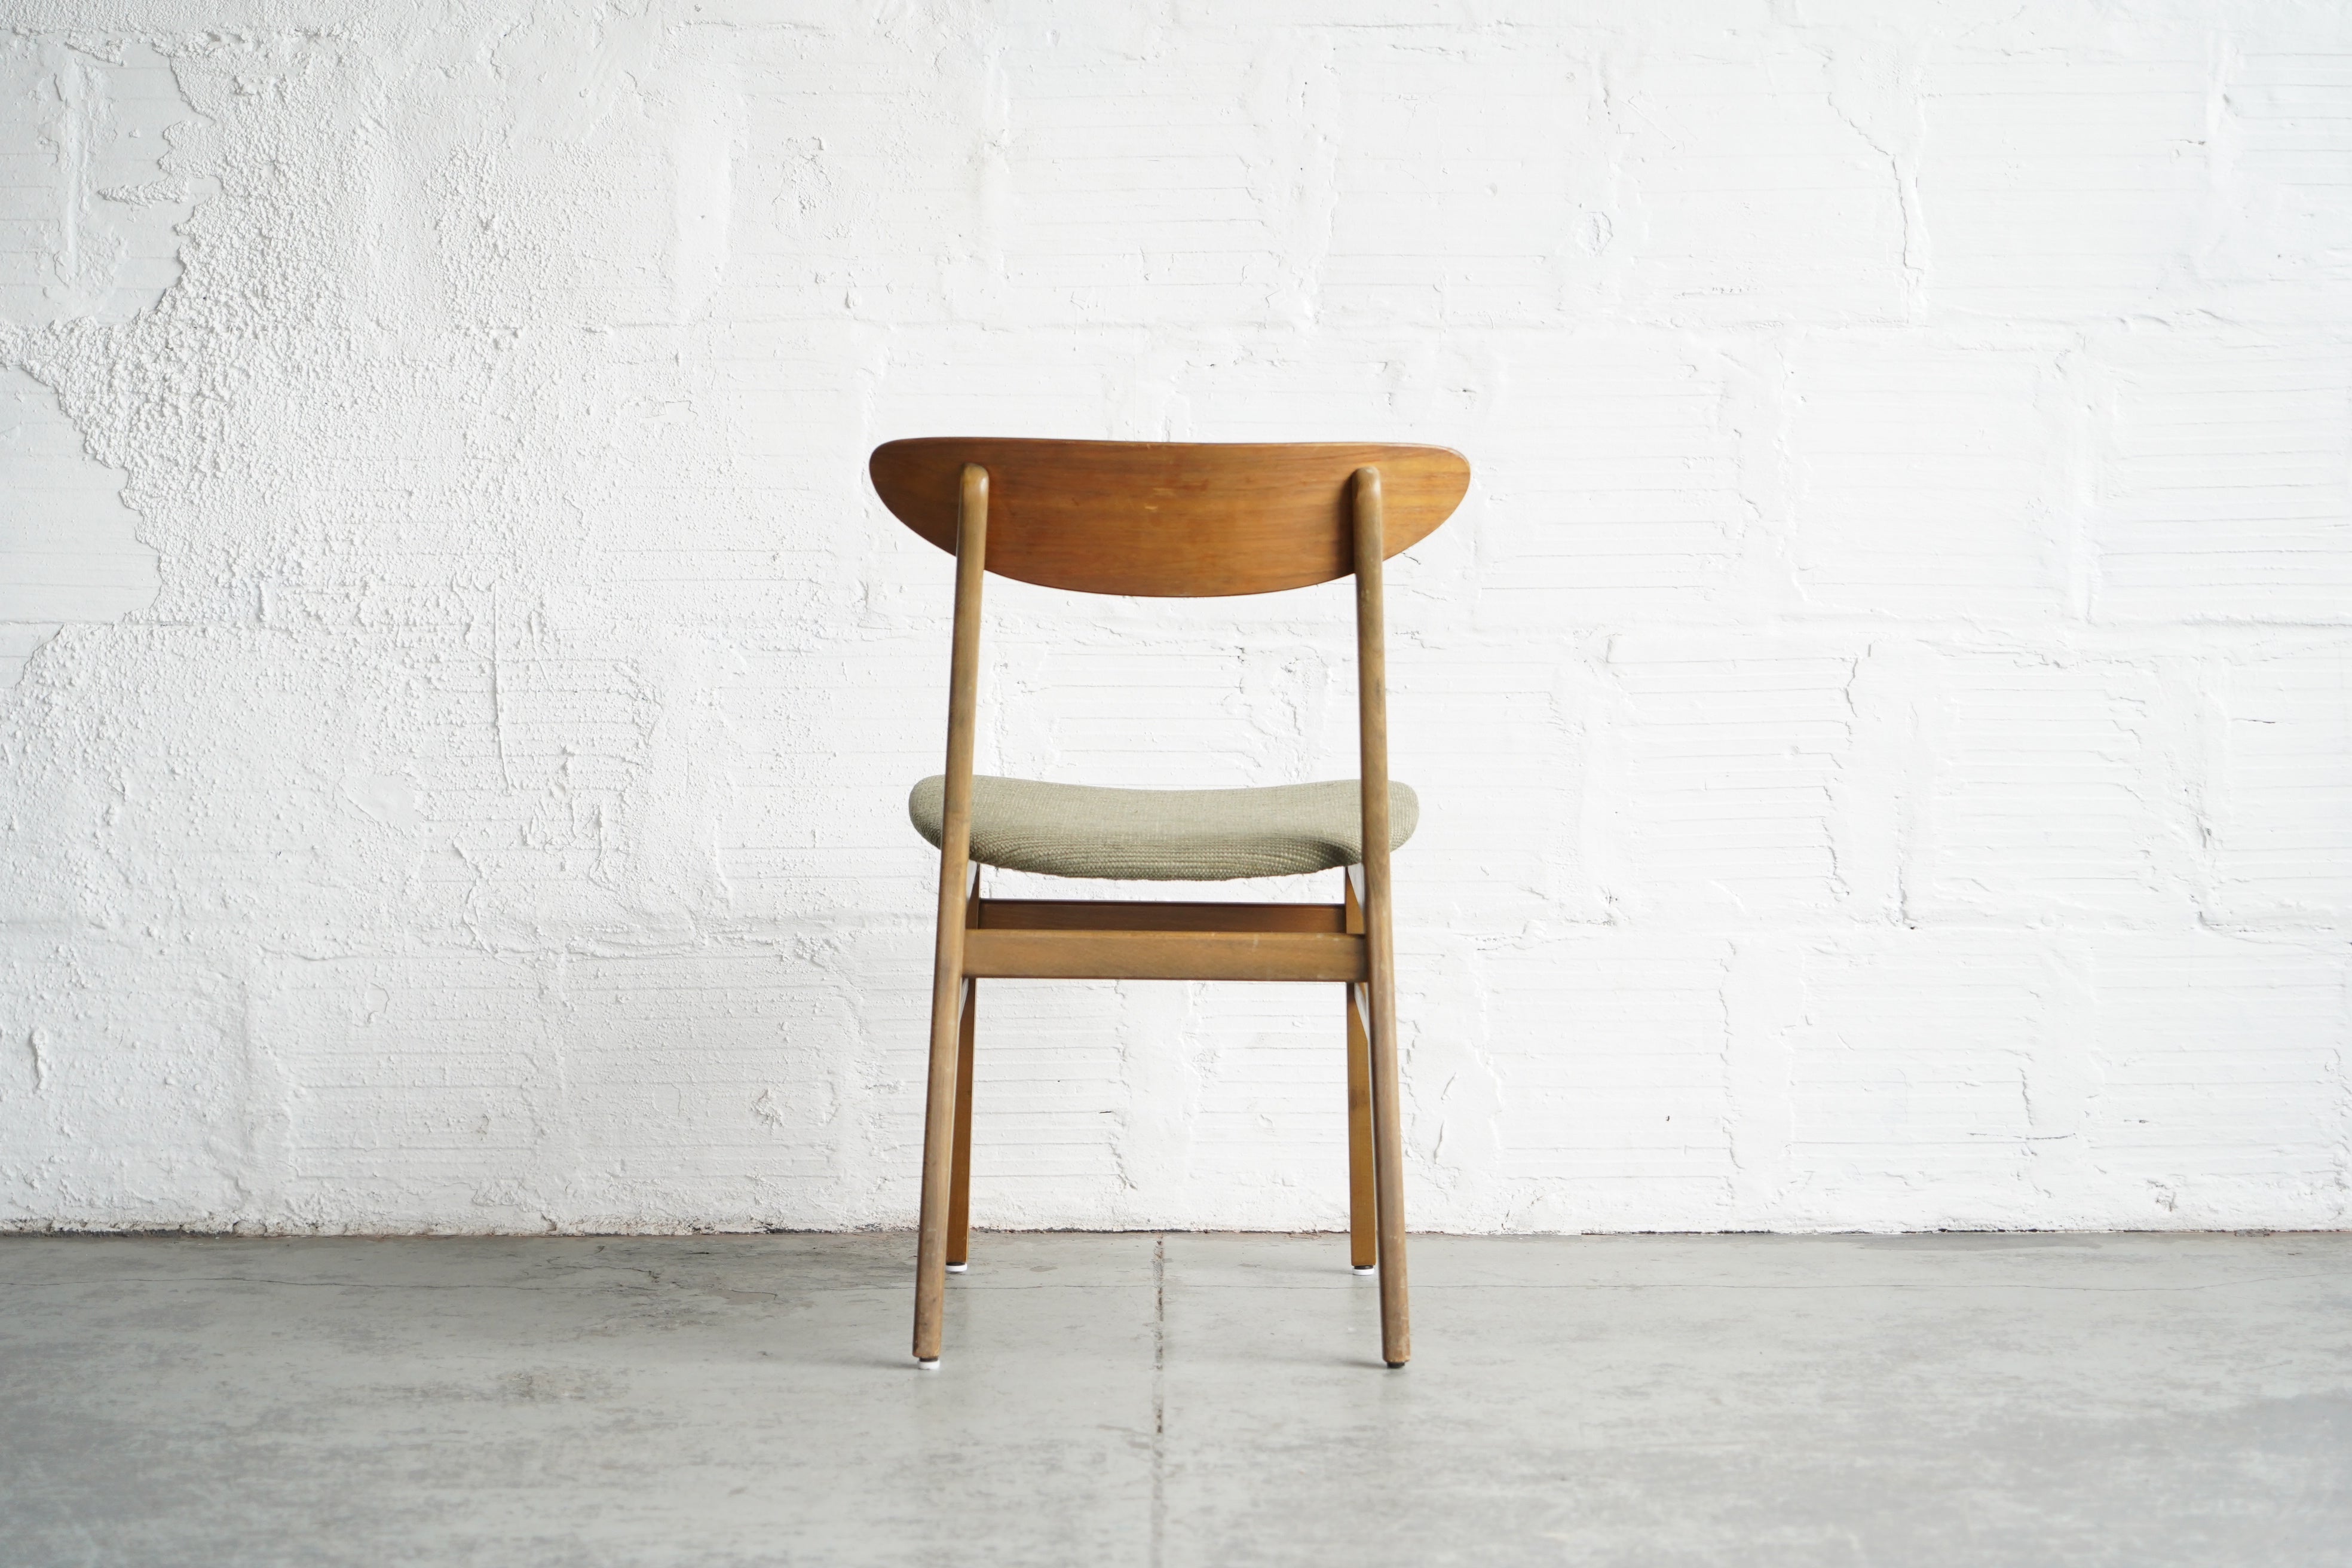 Thomas Harlev for Farstrup Dining Chairs